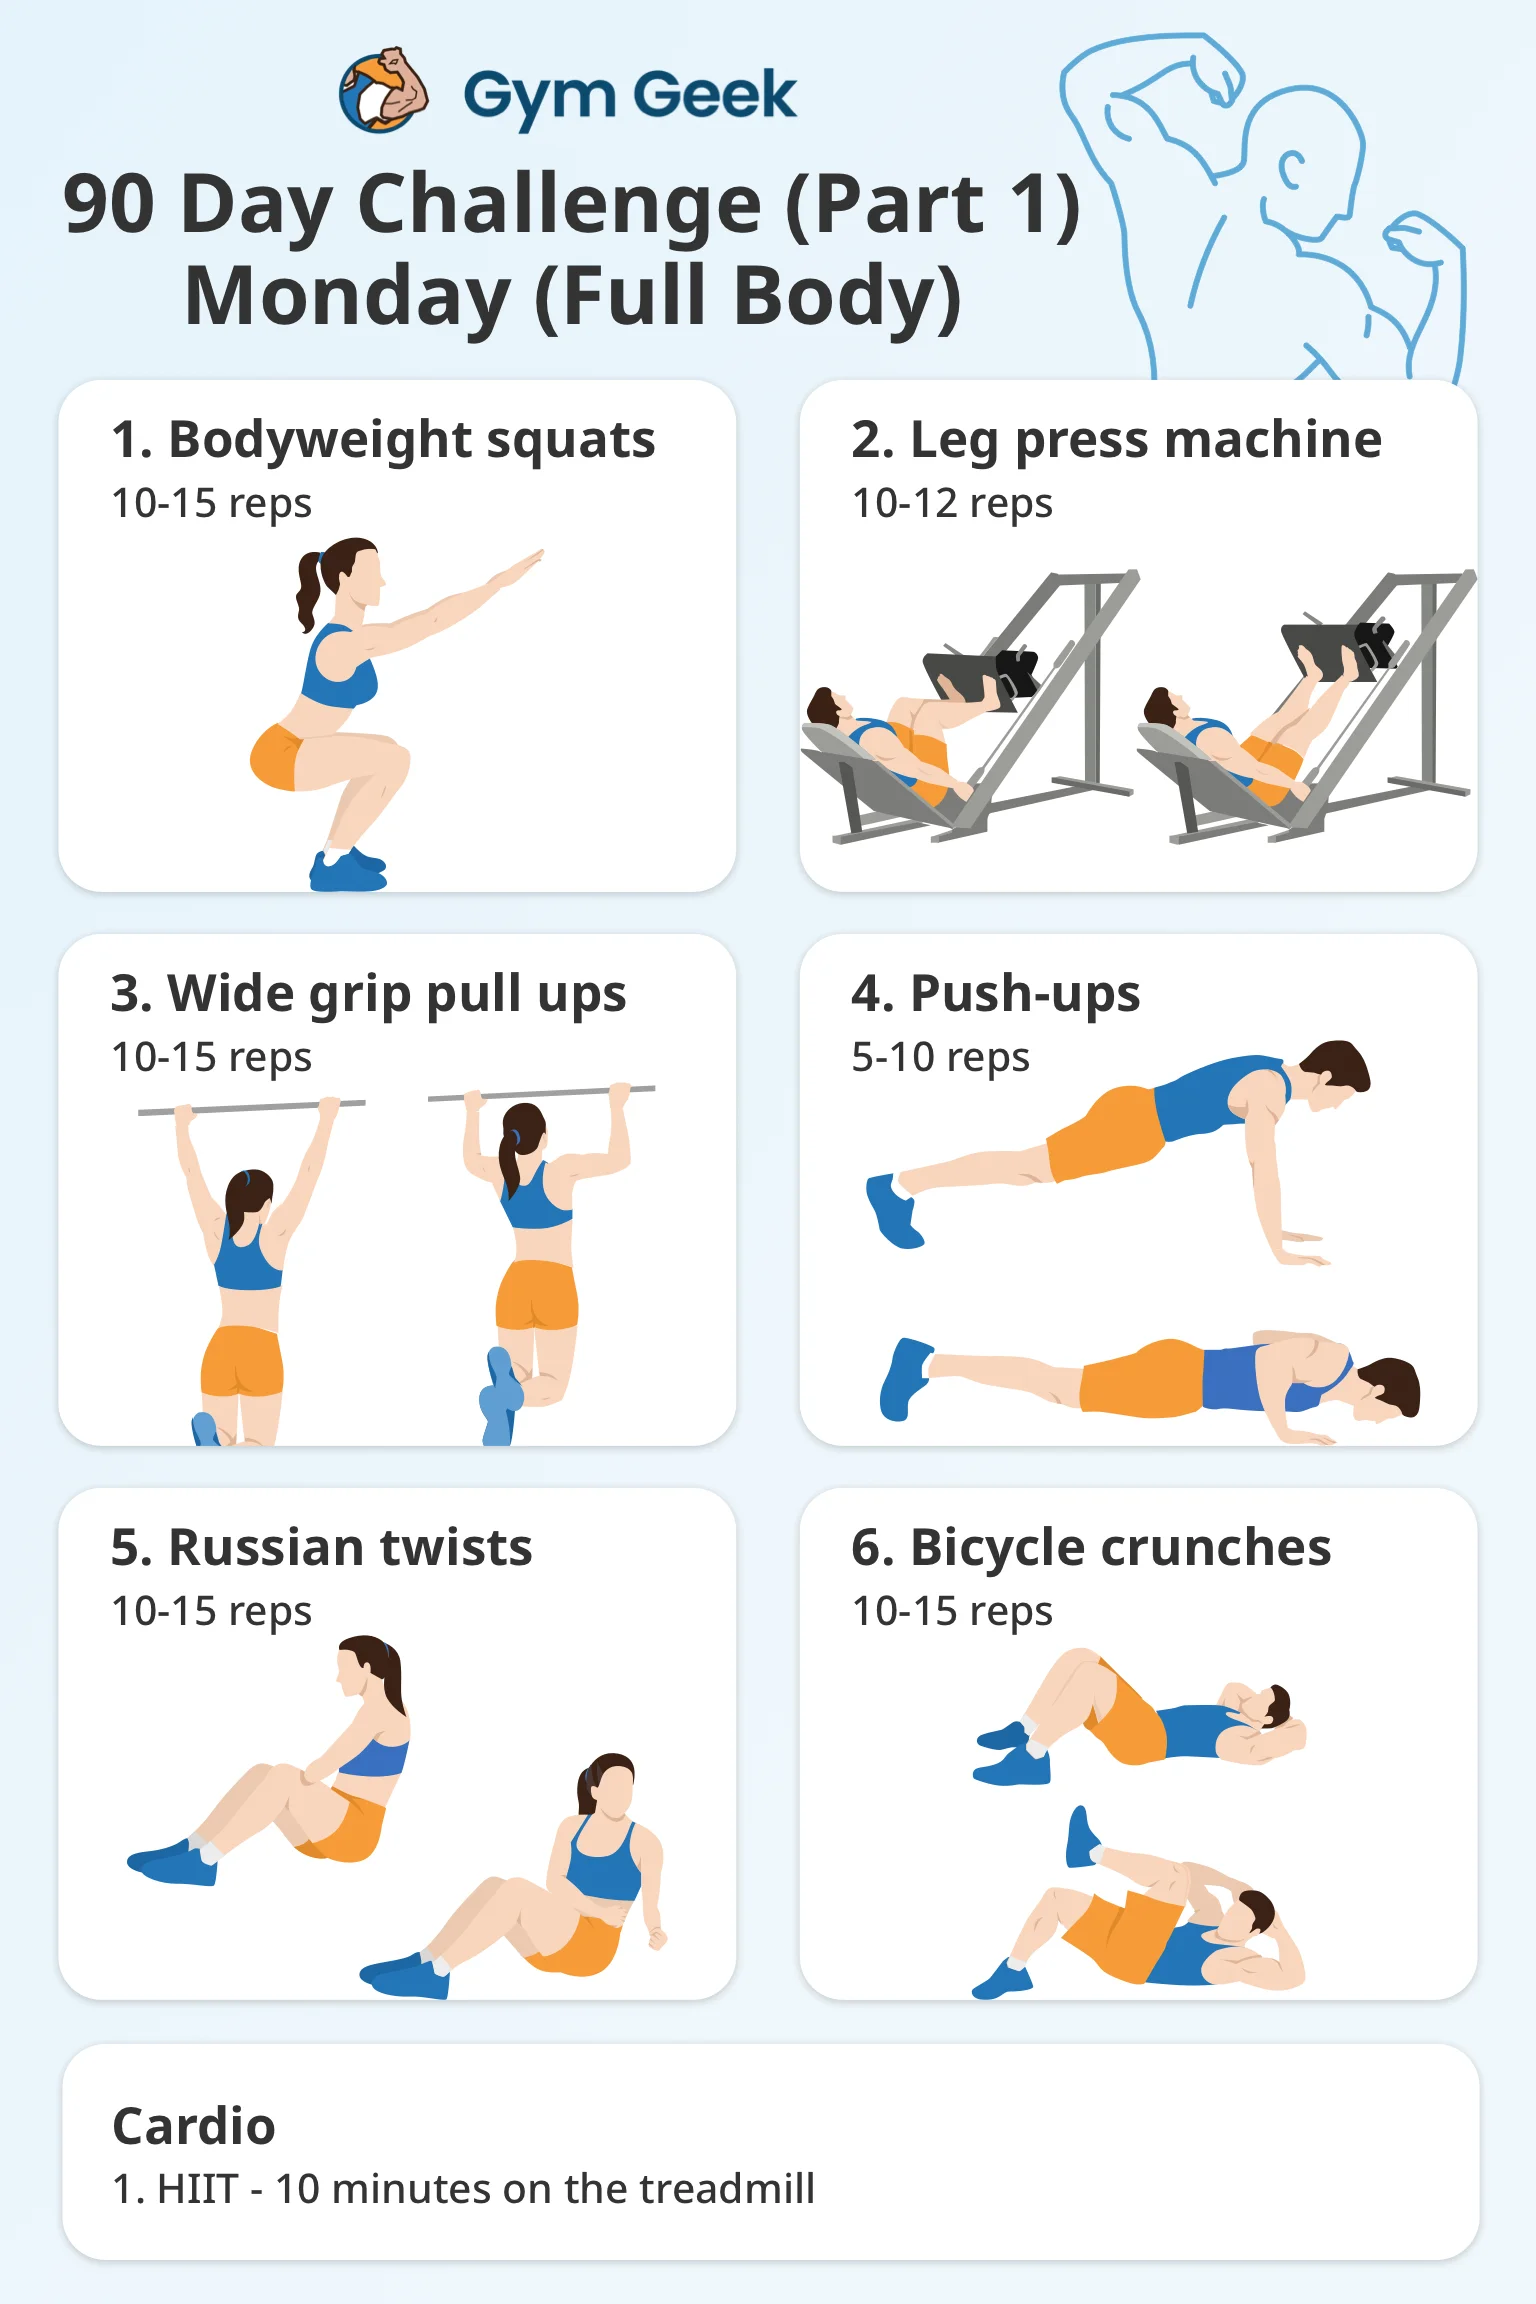 infographic - 90 day workout challenge, stage 1, Monday (Full Body)